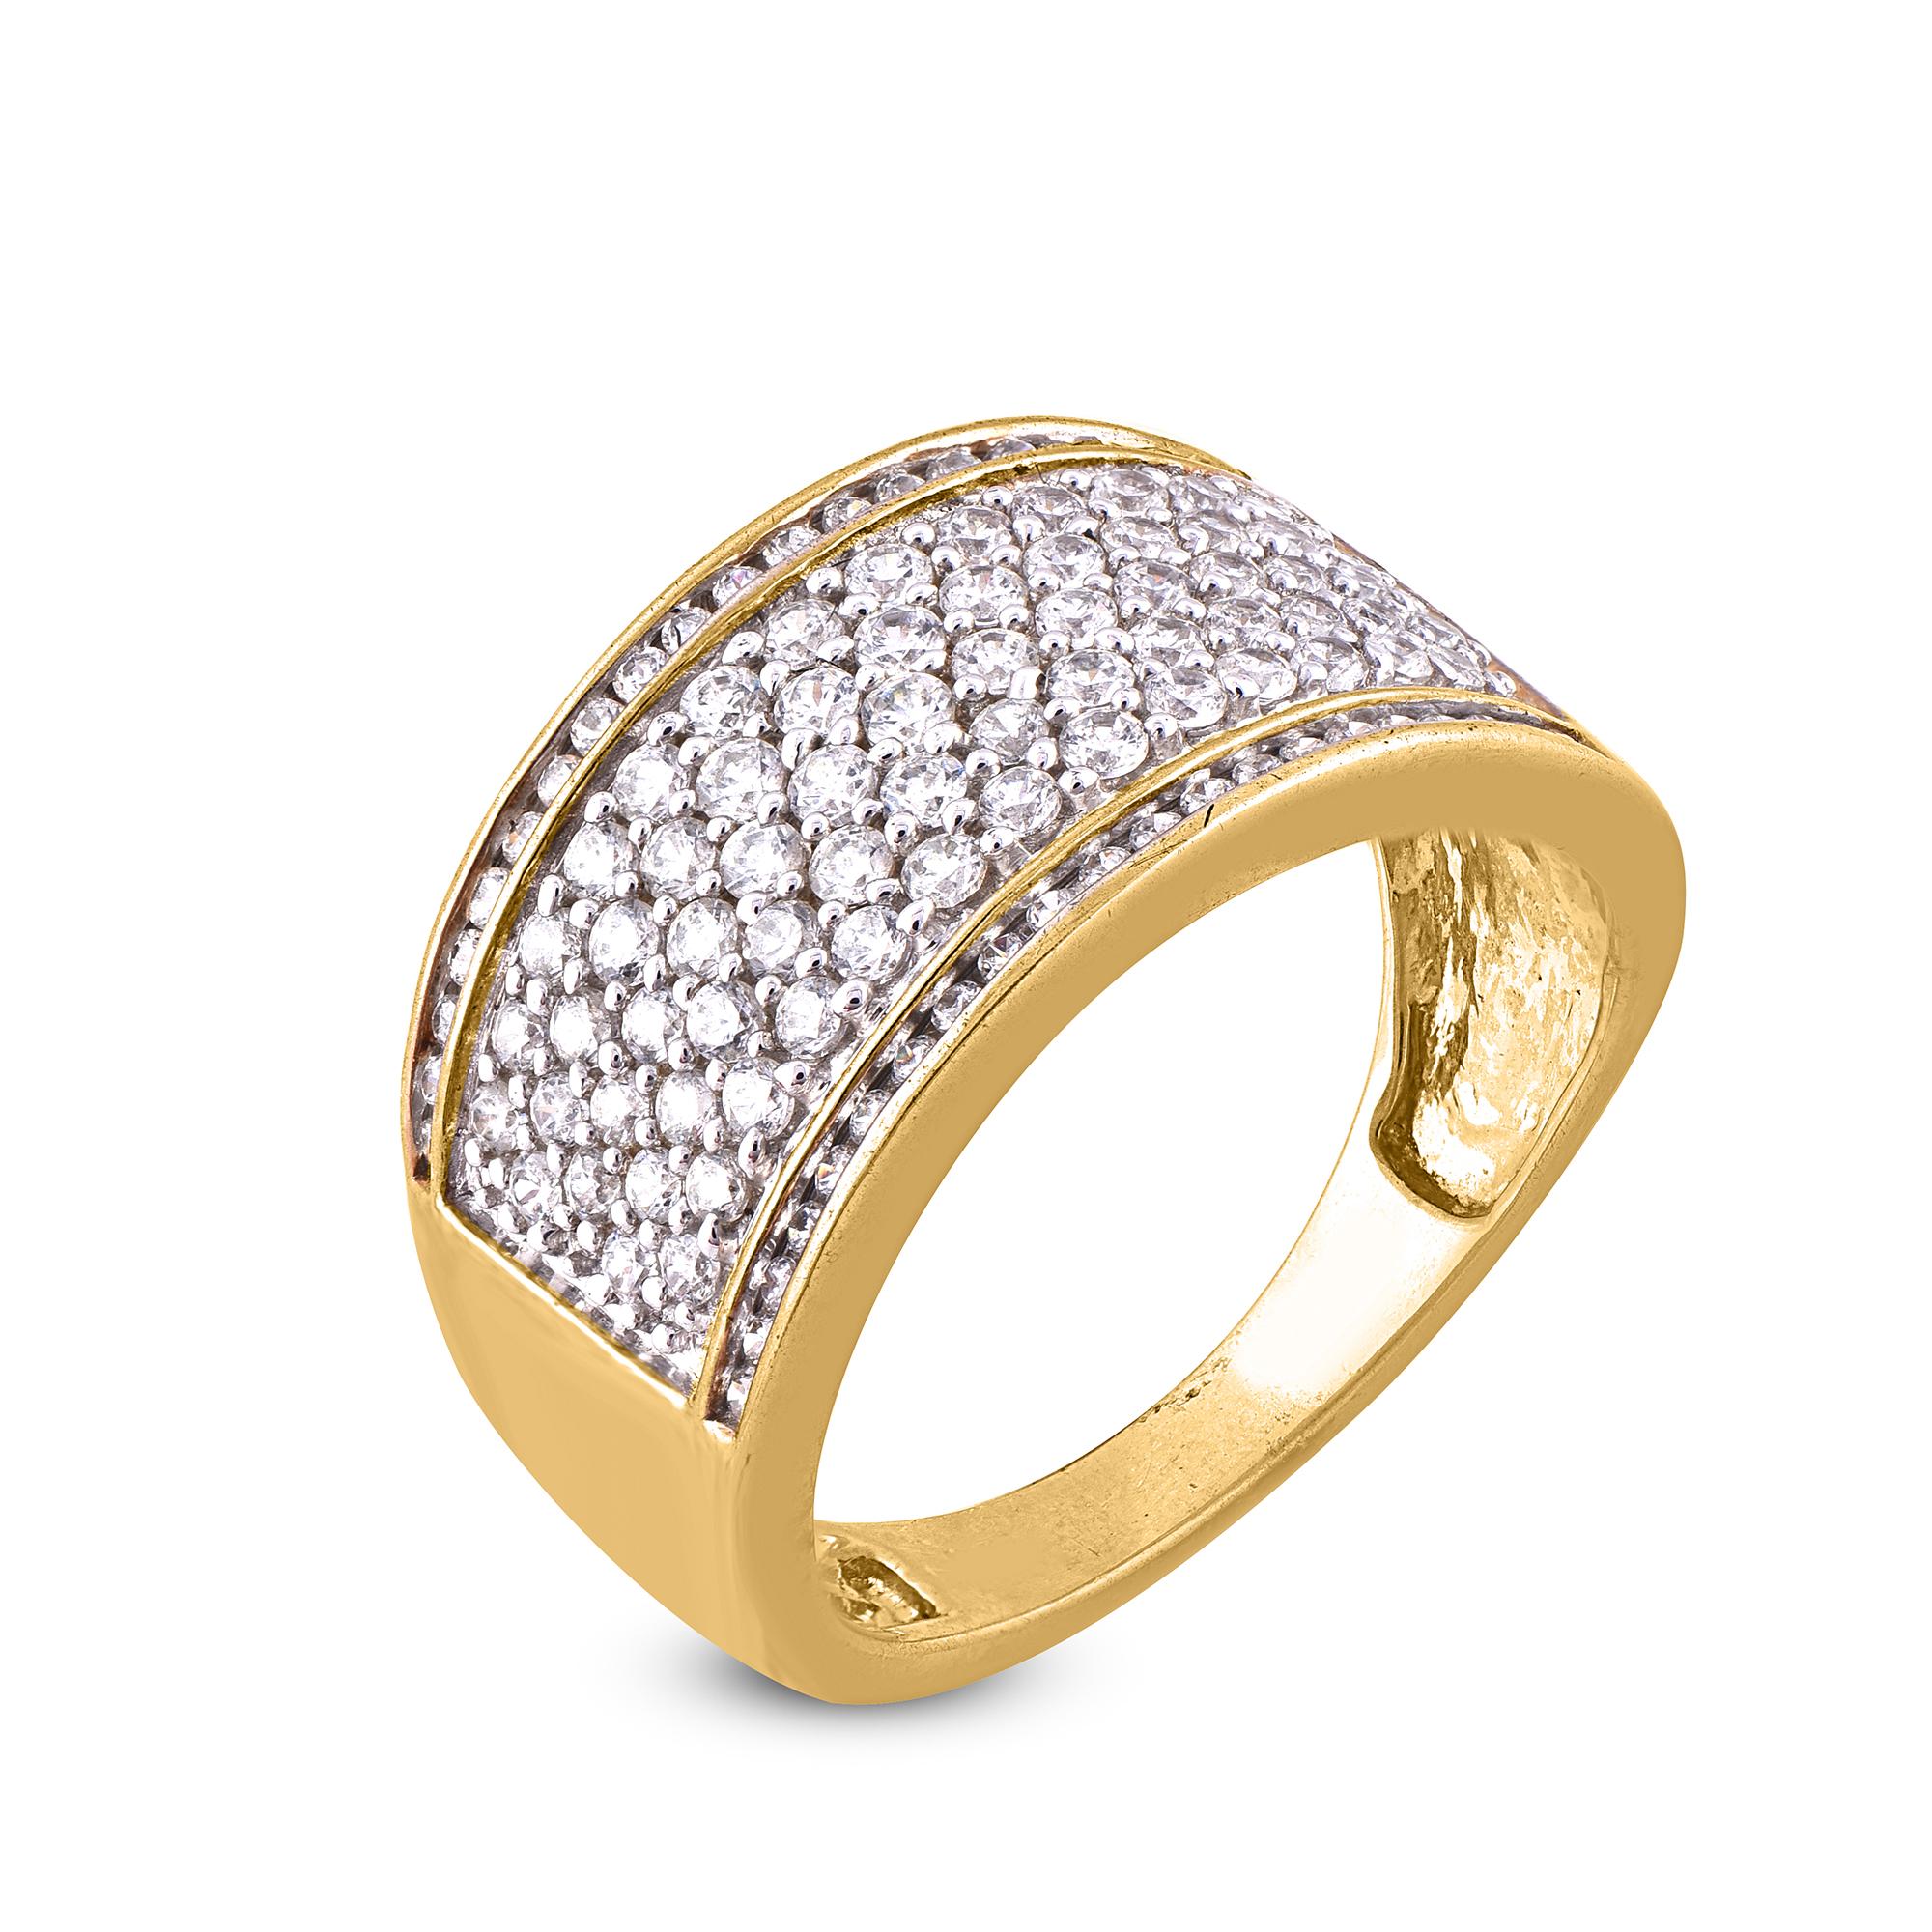 Contemporary TJD 1.0 Carat Natural Round Diamond Wedding Band Ring in 14 Karat Yellow Gold For Sale